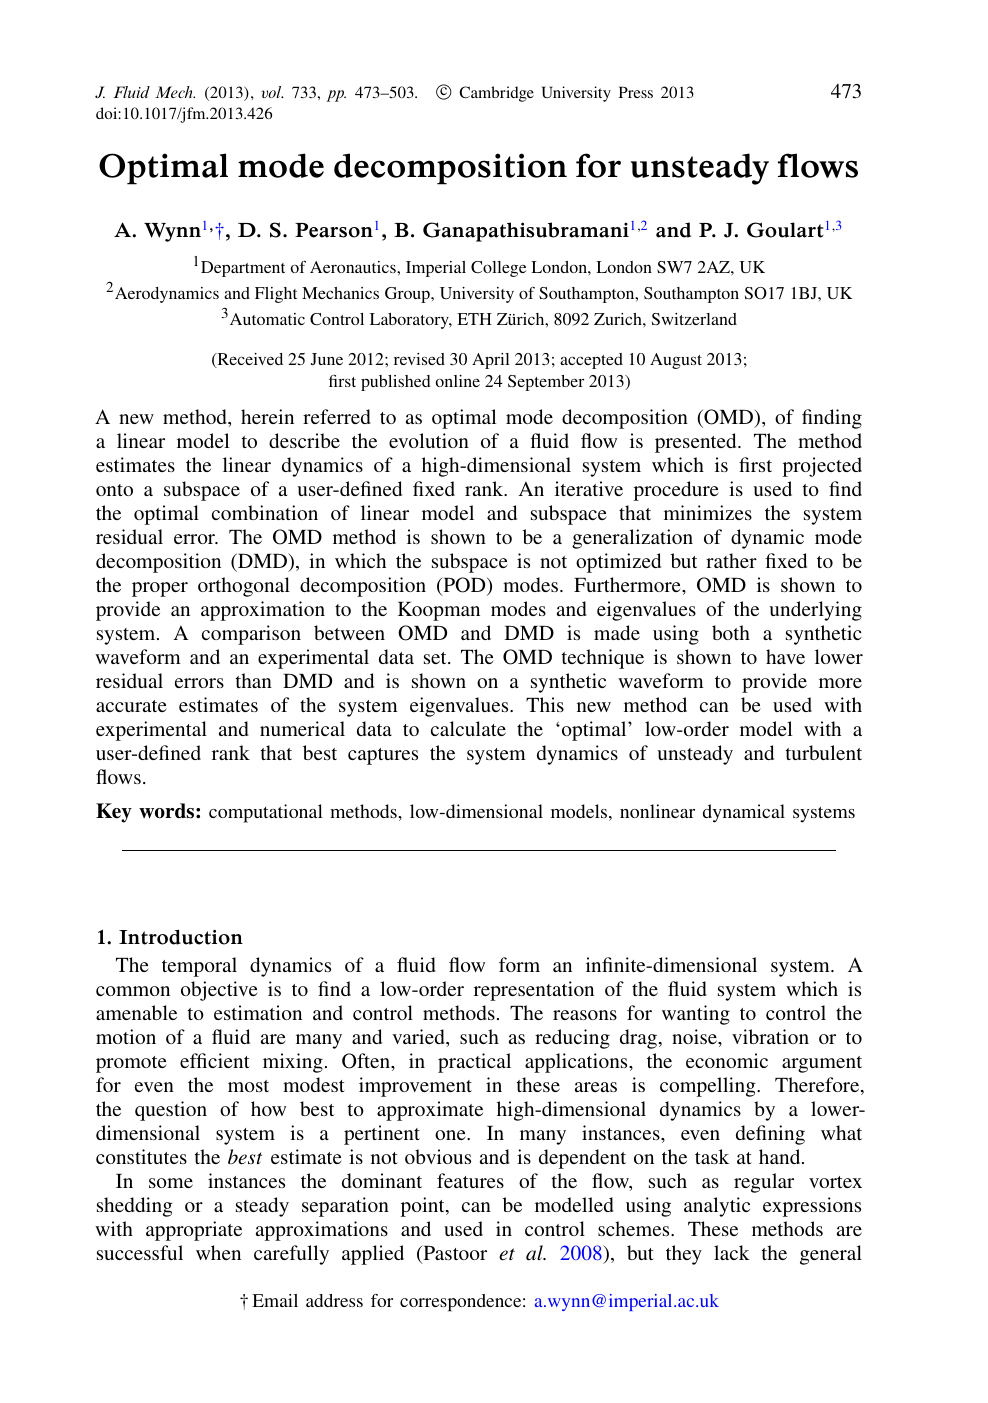 Optimal Mode Decomposition For Unsteady Flows Topic Of Research Paper In Electrical Engineering Electronic Engineering Information Engineering Download Scholarly Article Pdf And Read For Free On Cyberleninka Open Science Hub